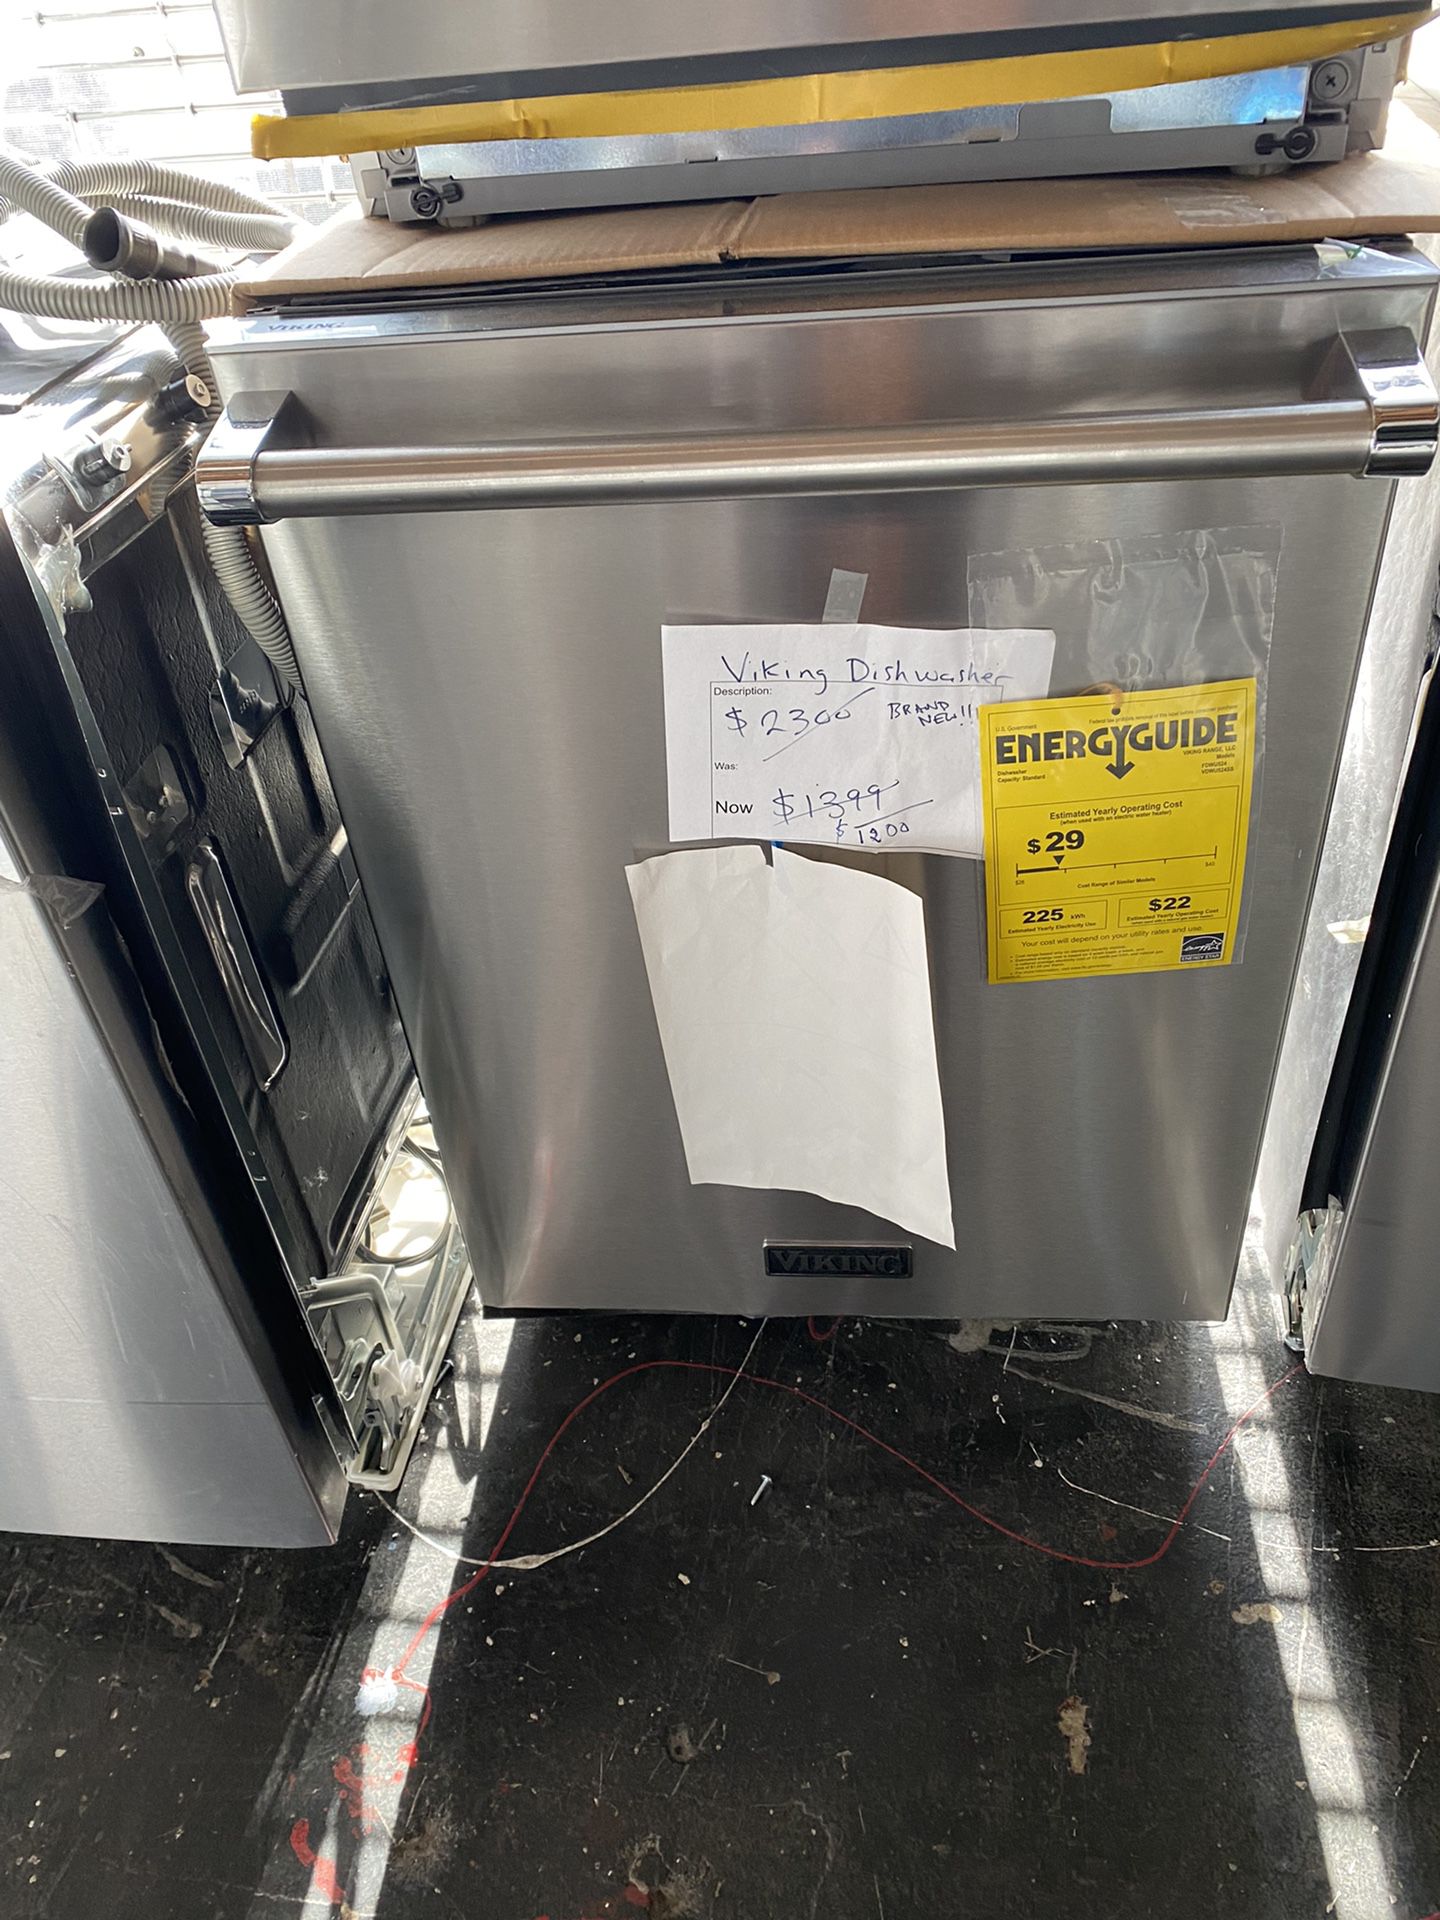 Viking - Dishwasher - Stainless Steel. New out of the cardboard box  1 year manufacturer warranty  Delivery and haul away are available.              